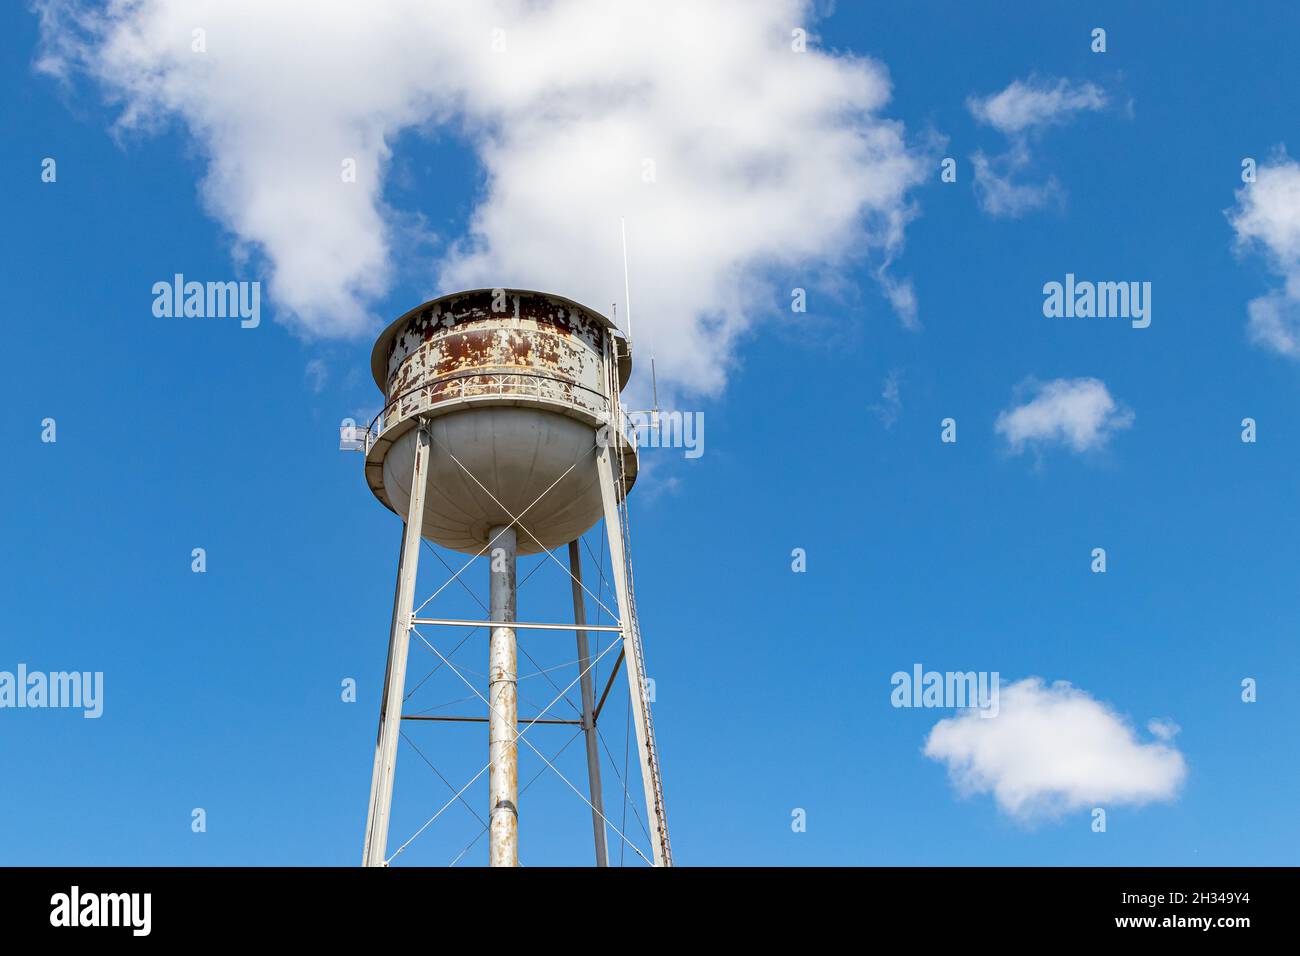 Old, rusty water tower. clean drinking water, water supply shortage and pollution concept Stock Photo